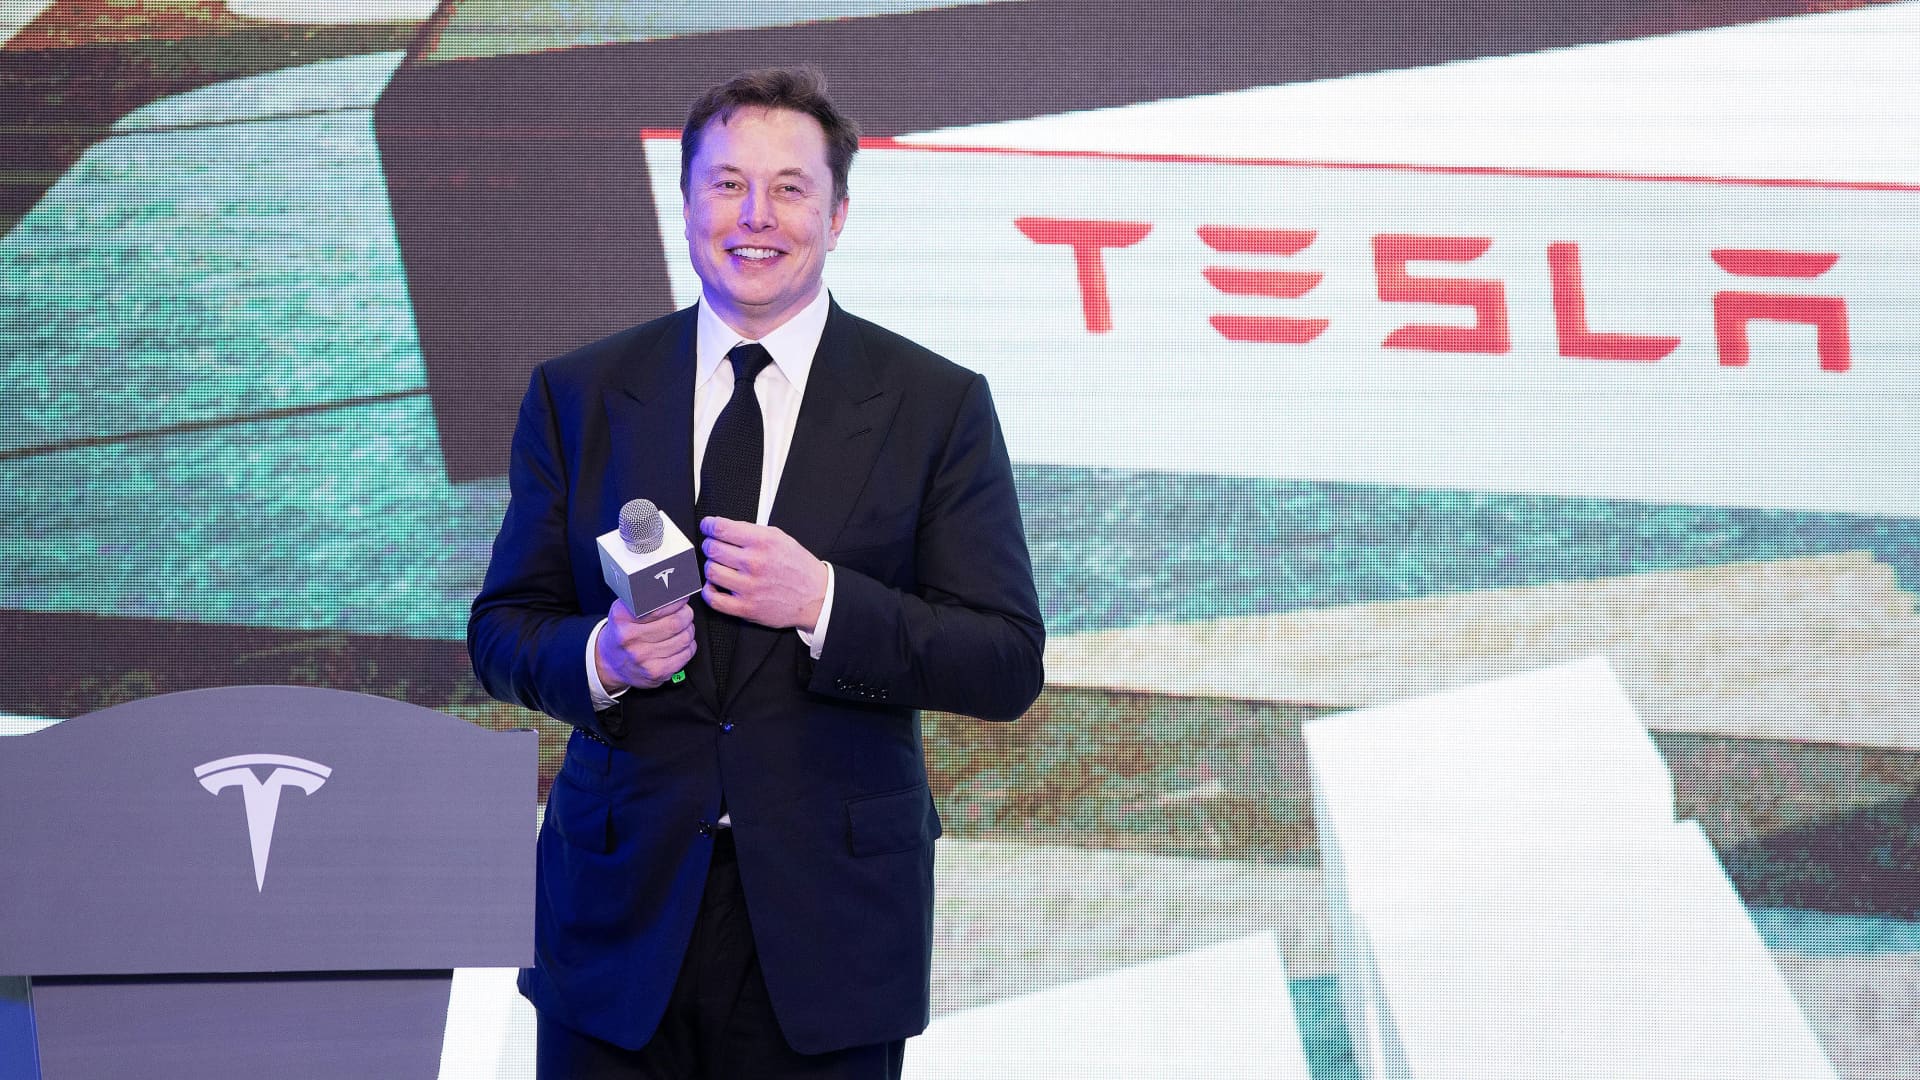 Tesla shares rise as Elon Musk meets with China's foreign minister